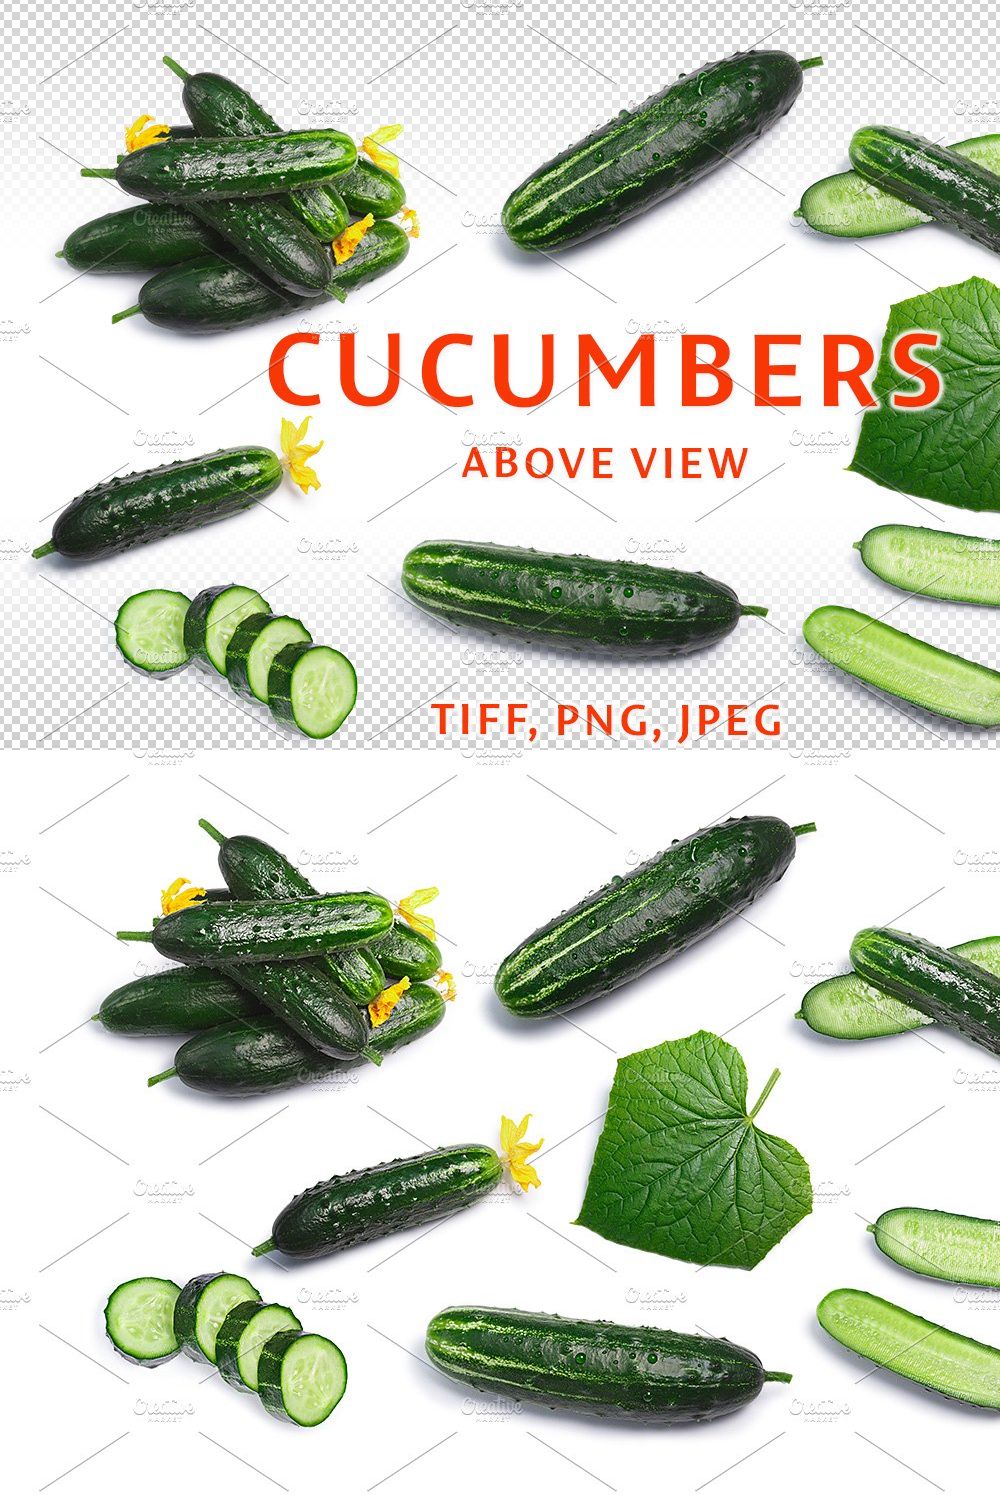 Cucumbers above pinterest preview image.